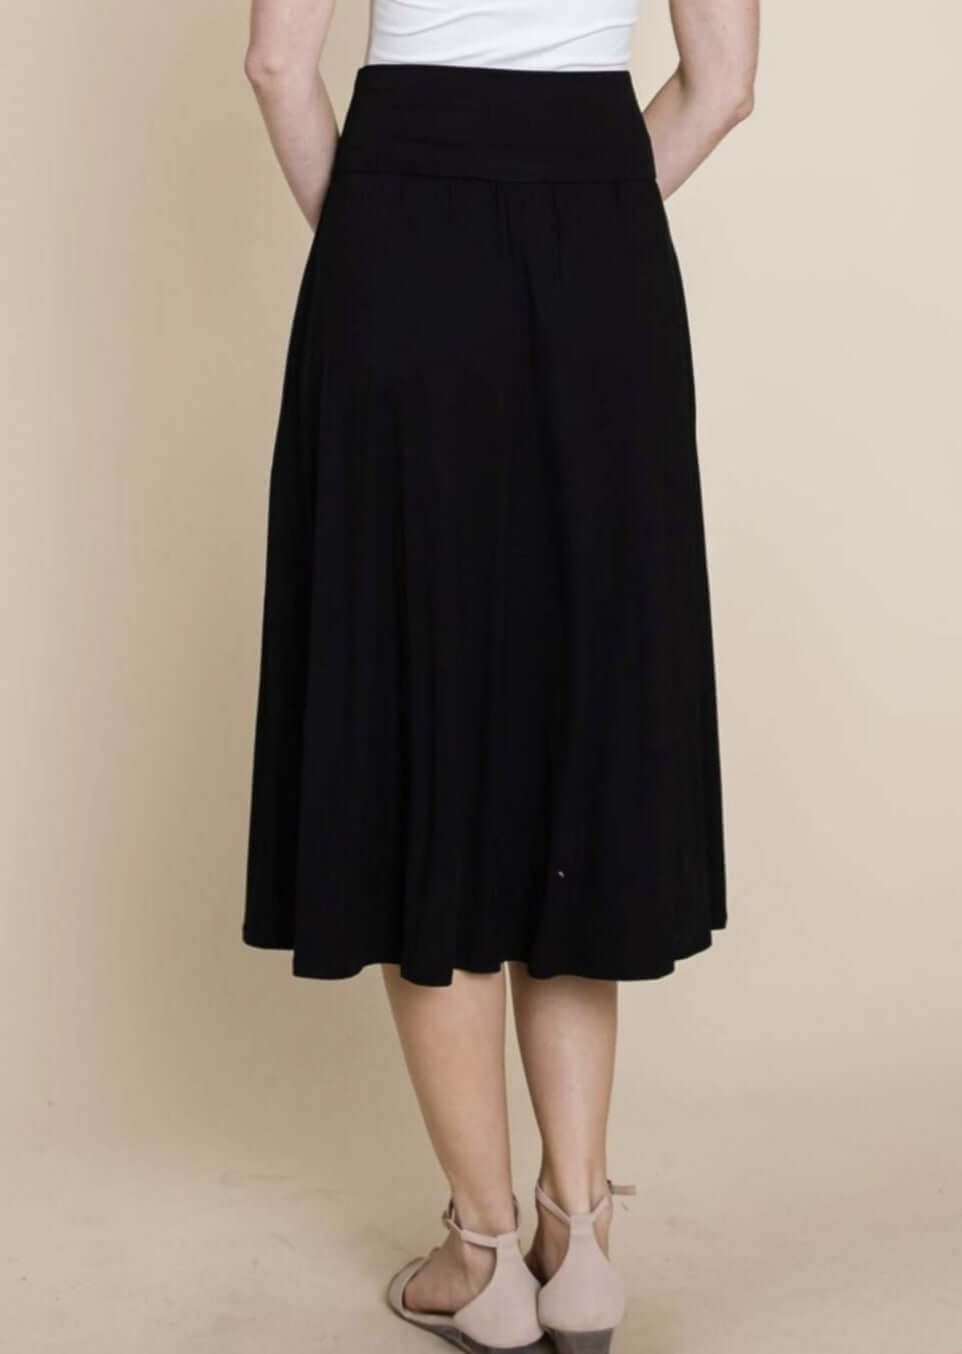 Made in USA Women's Casual Pull-on Midi Length Comfortable Lightweight Skirt with Side Pockets in Black | Classy Cozy Cool Women's Made in America Boutique